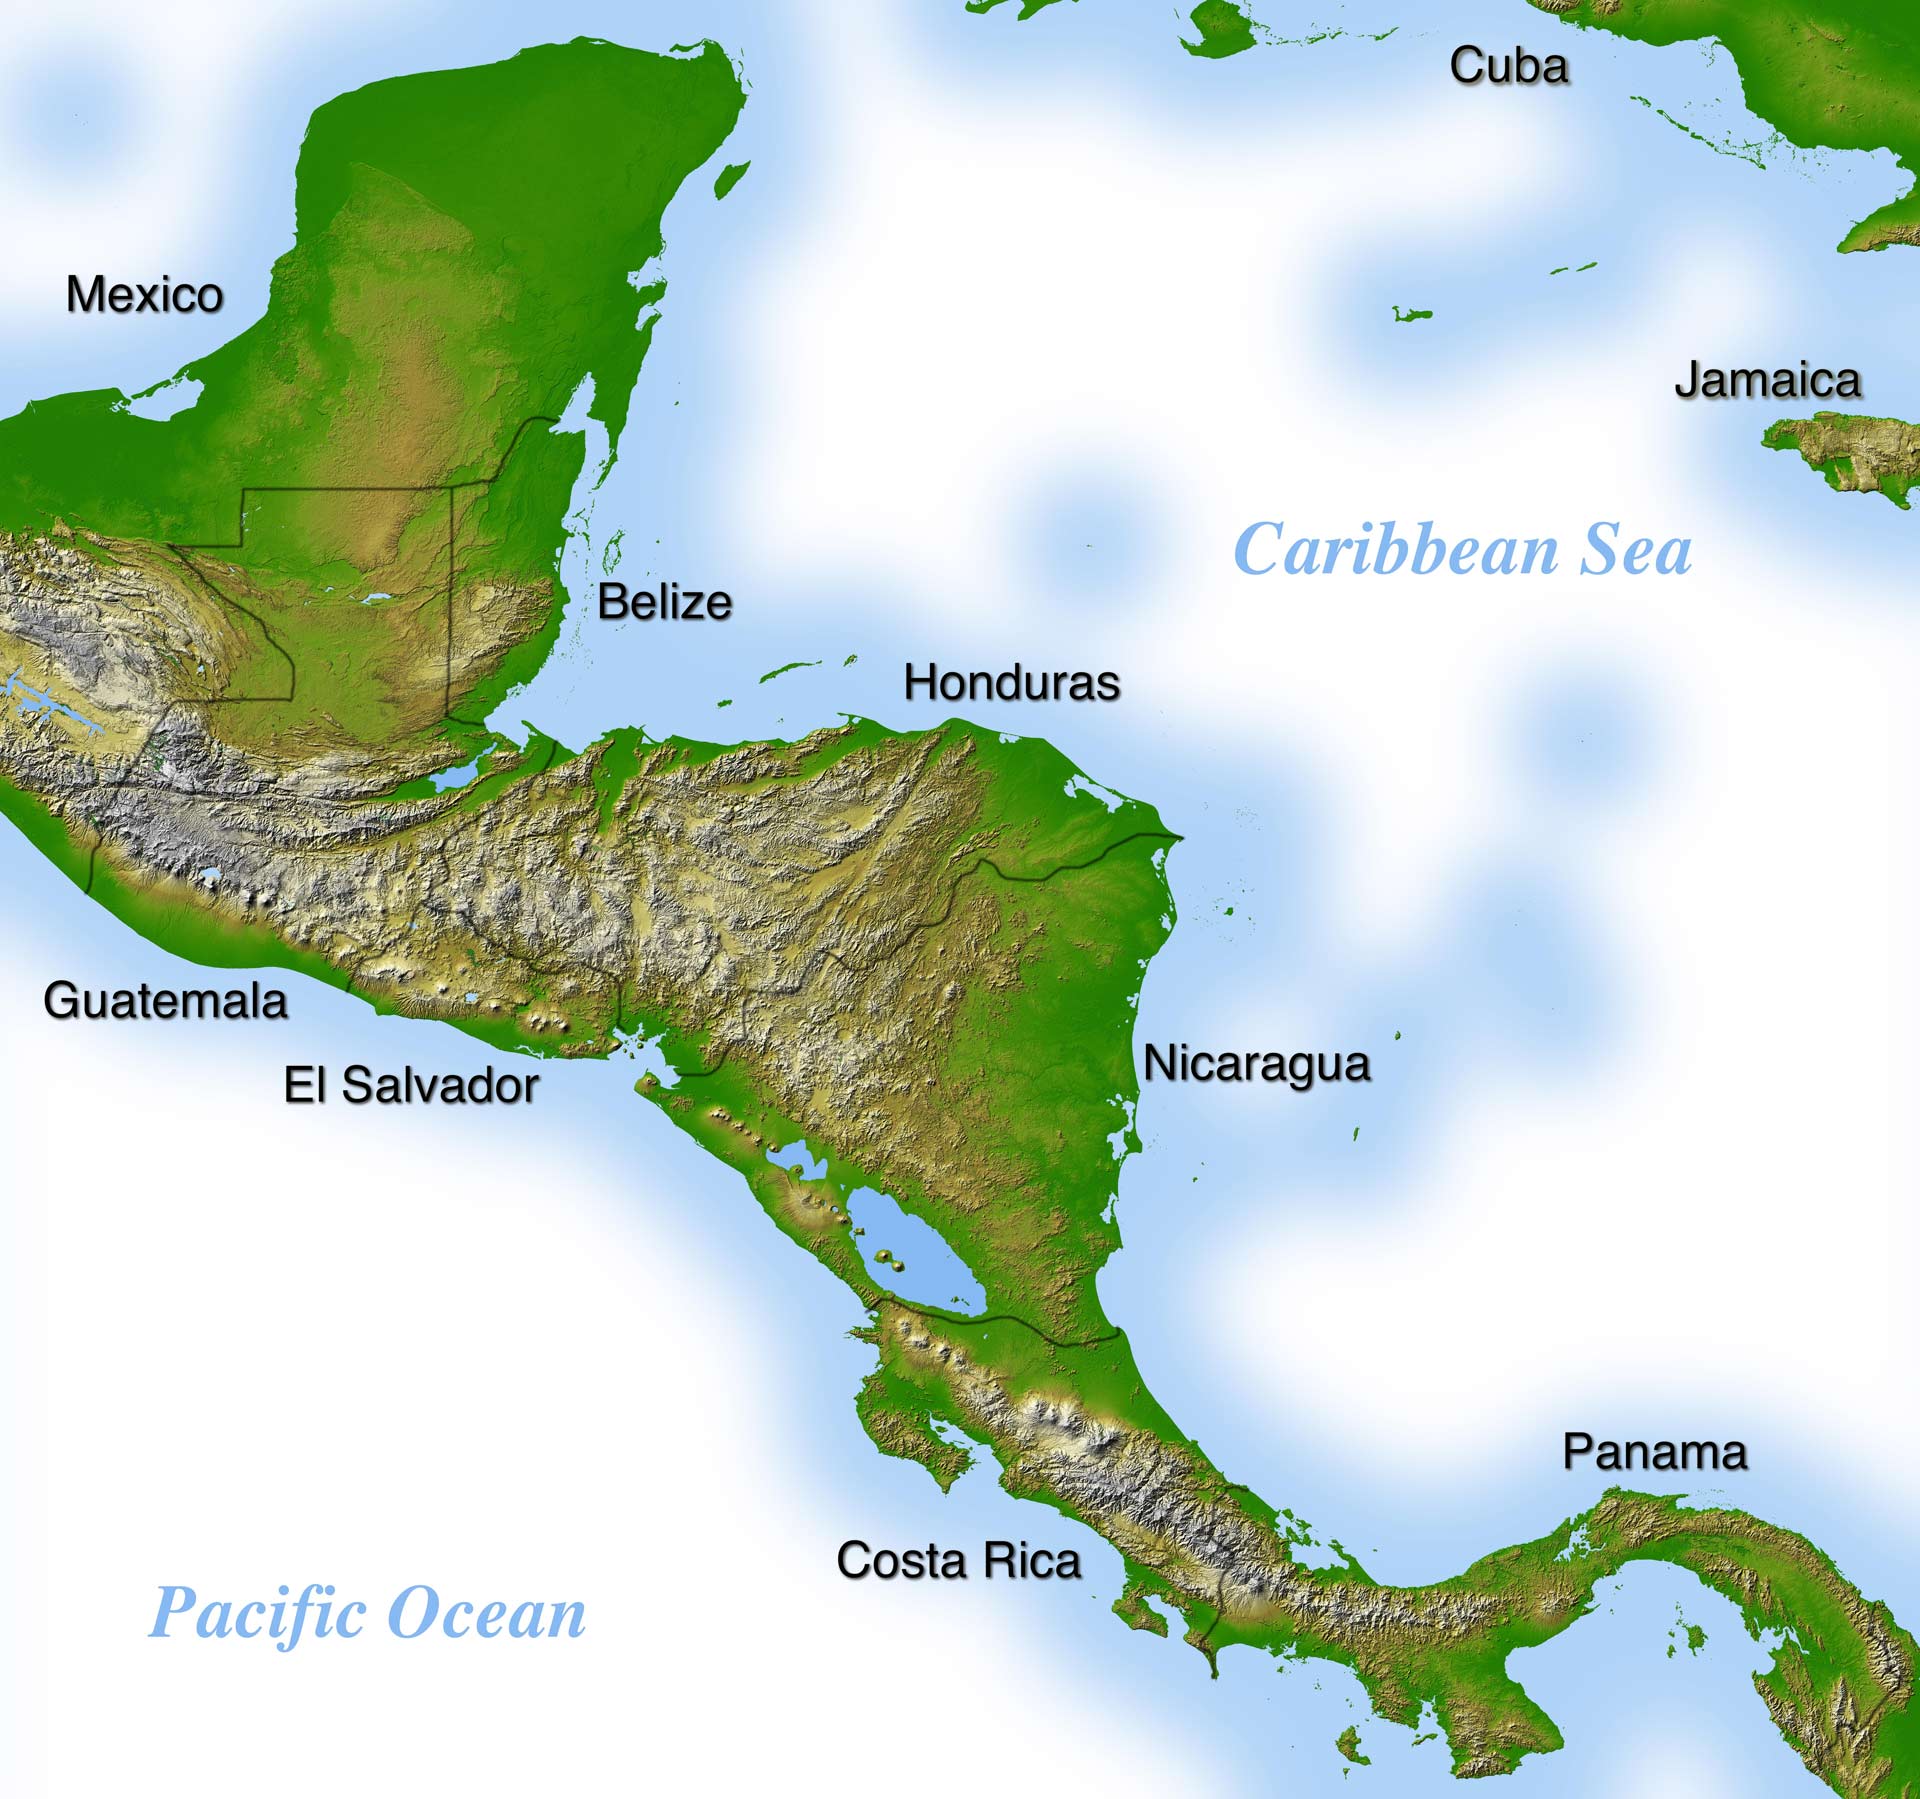 central america map